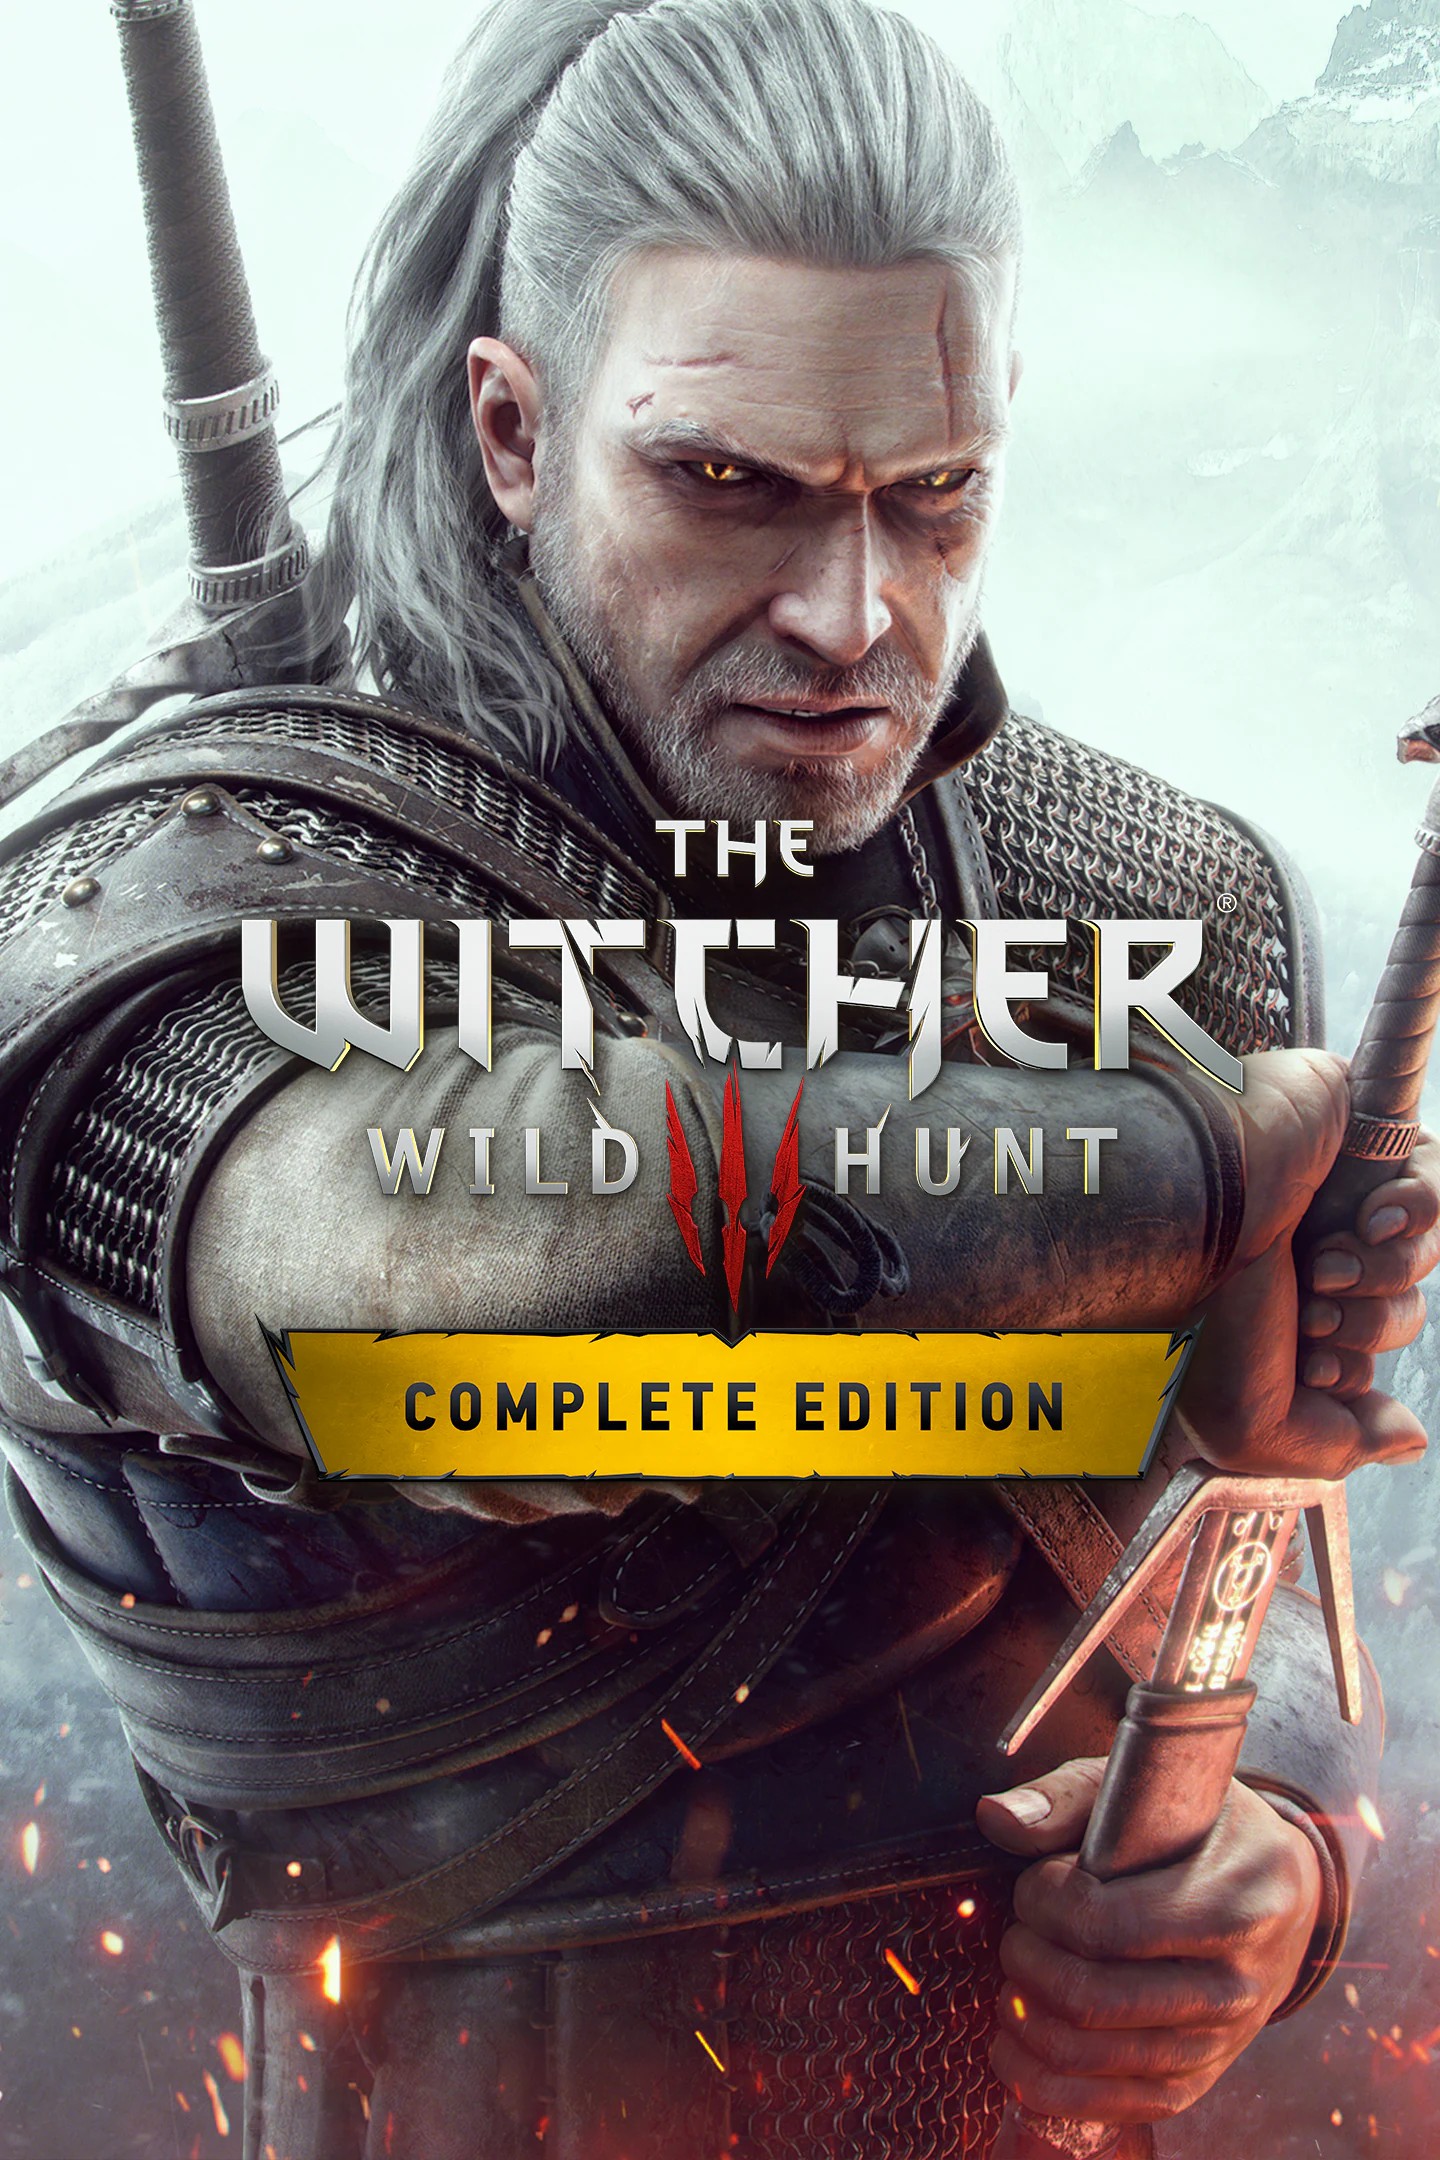 The Witcher Wild 3 Hunt (Complete Edition) - Nintendo Switch Games